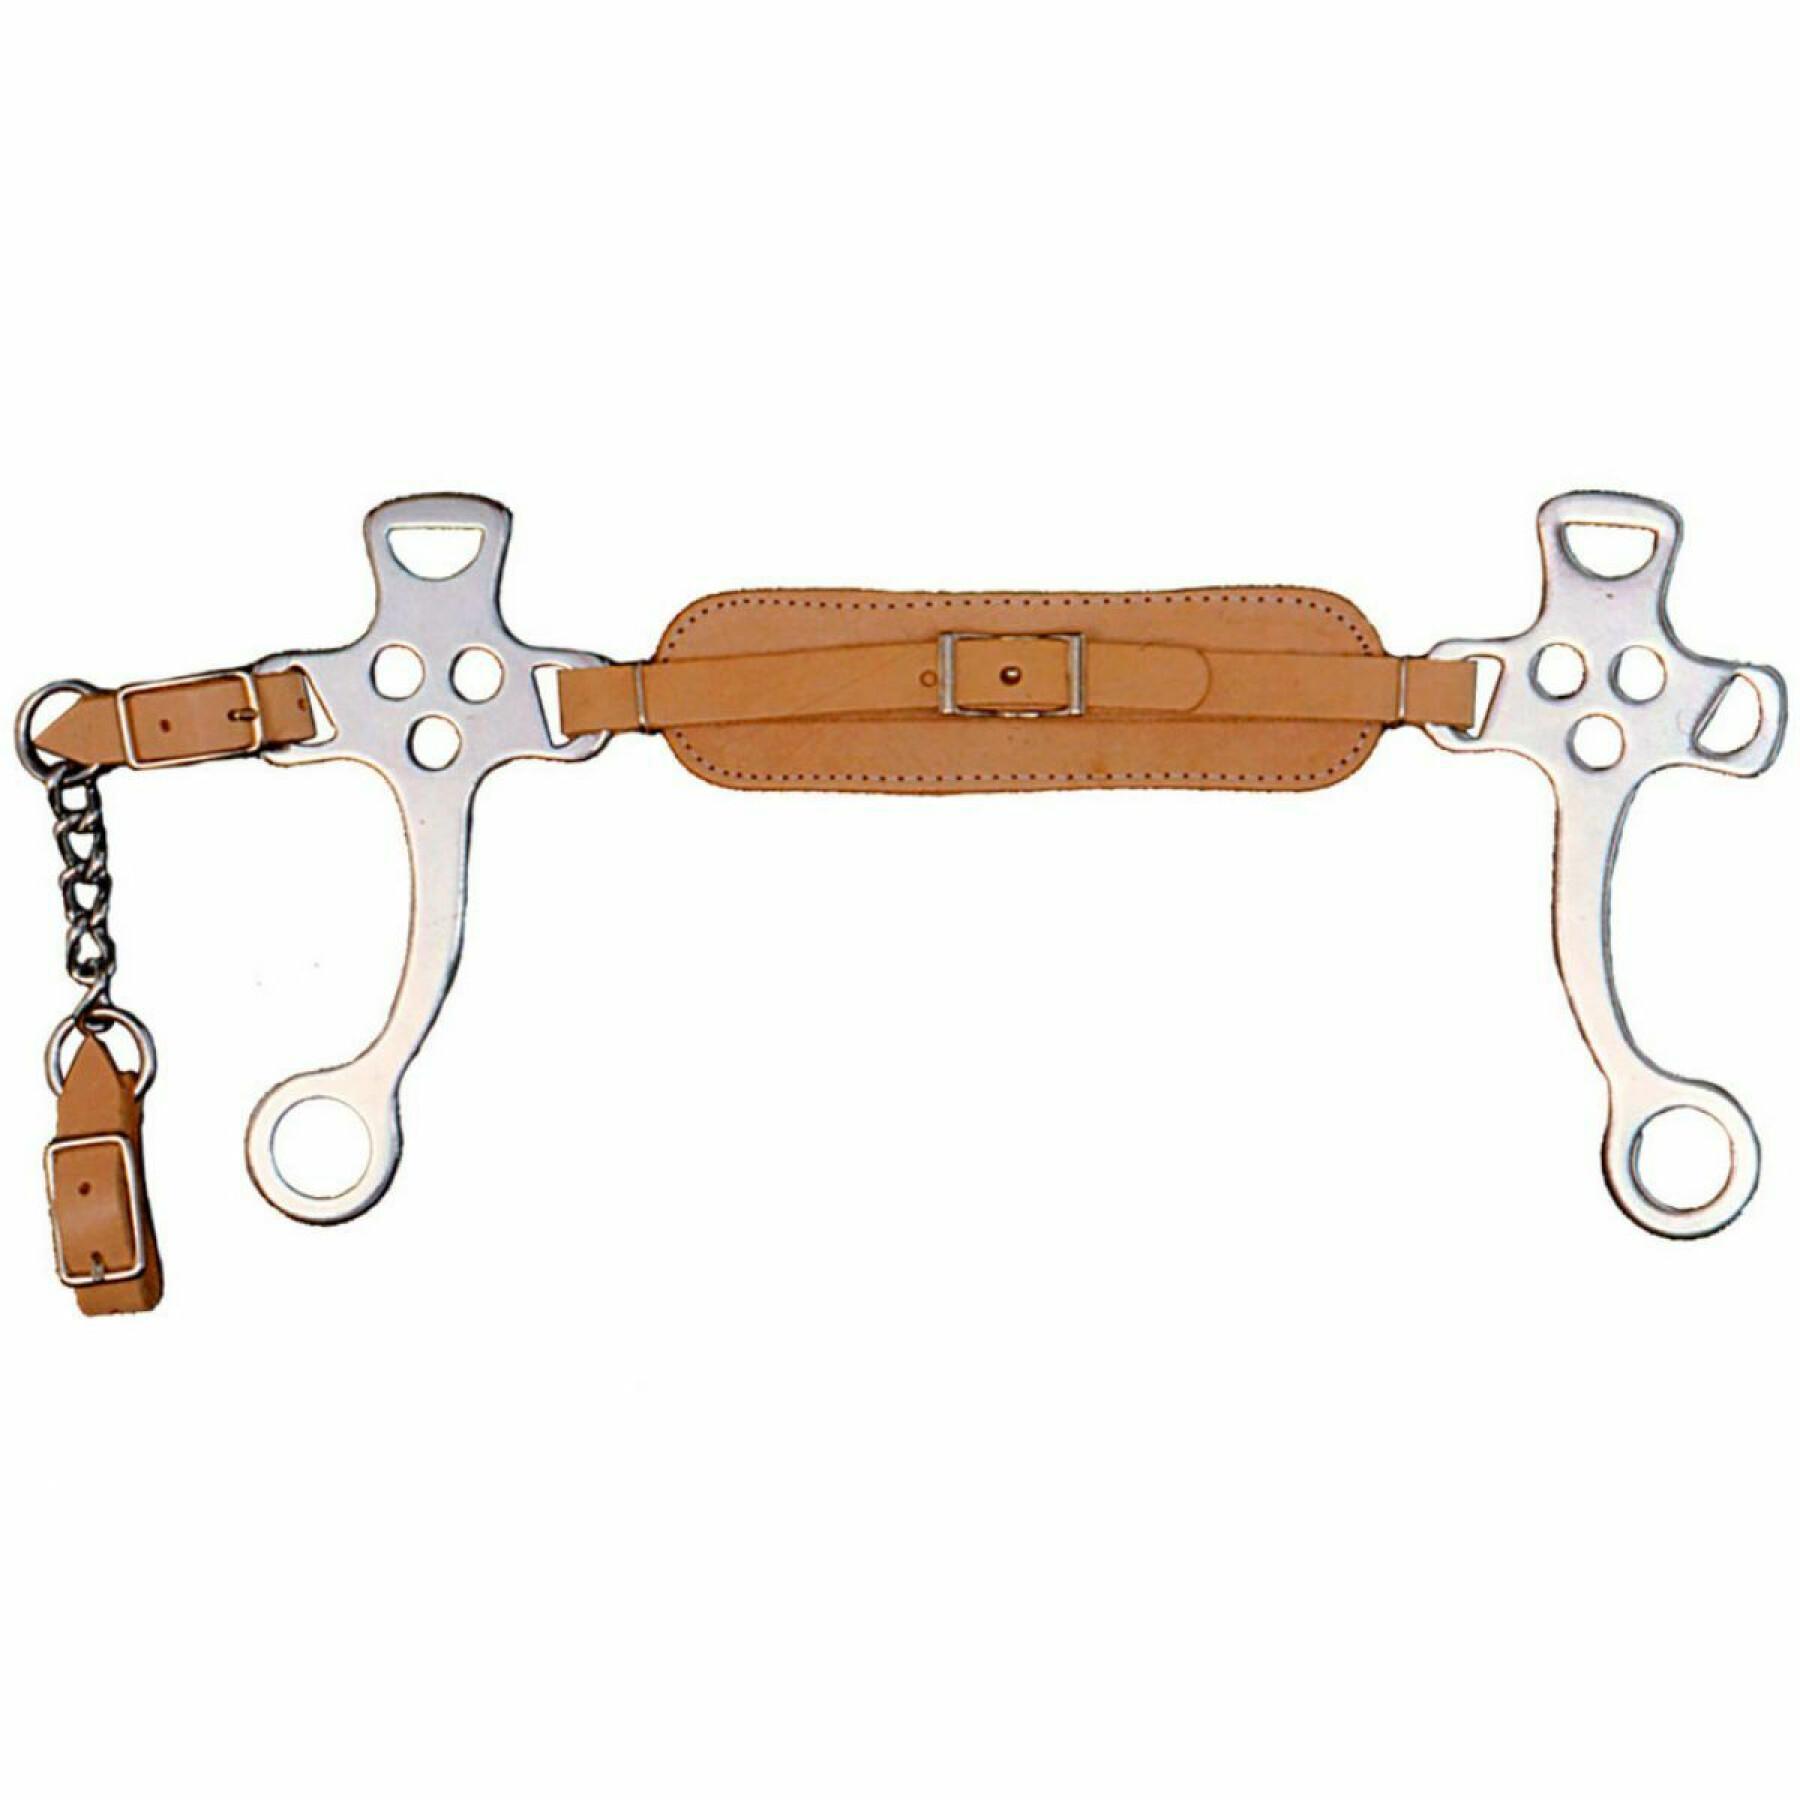 Hackamore with short branches Tattini